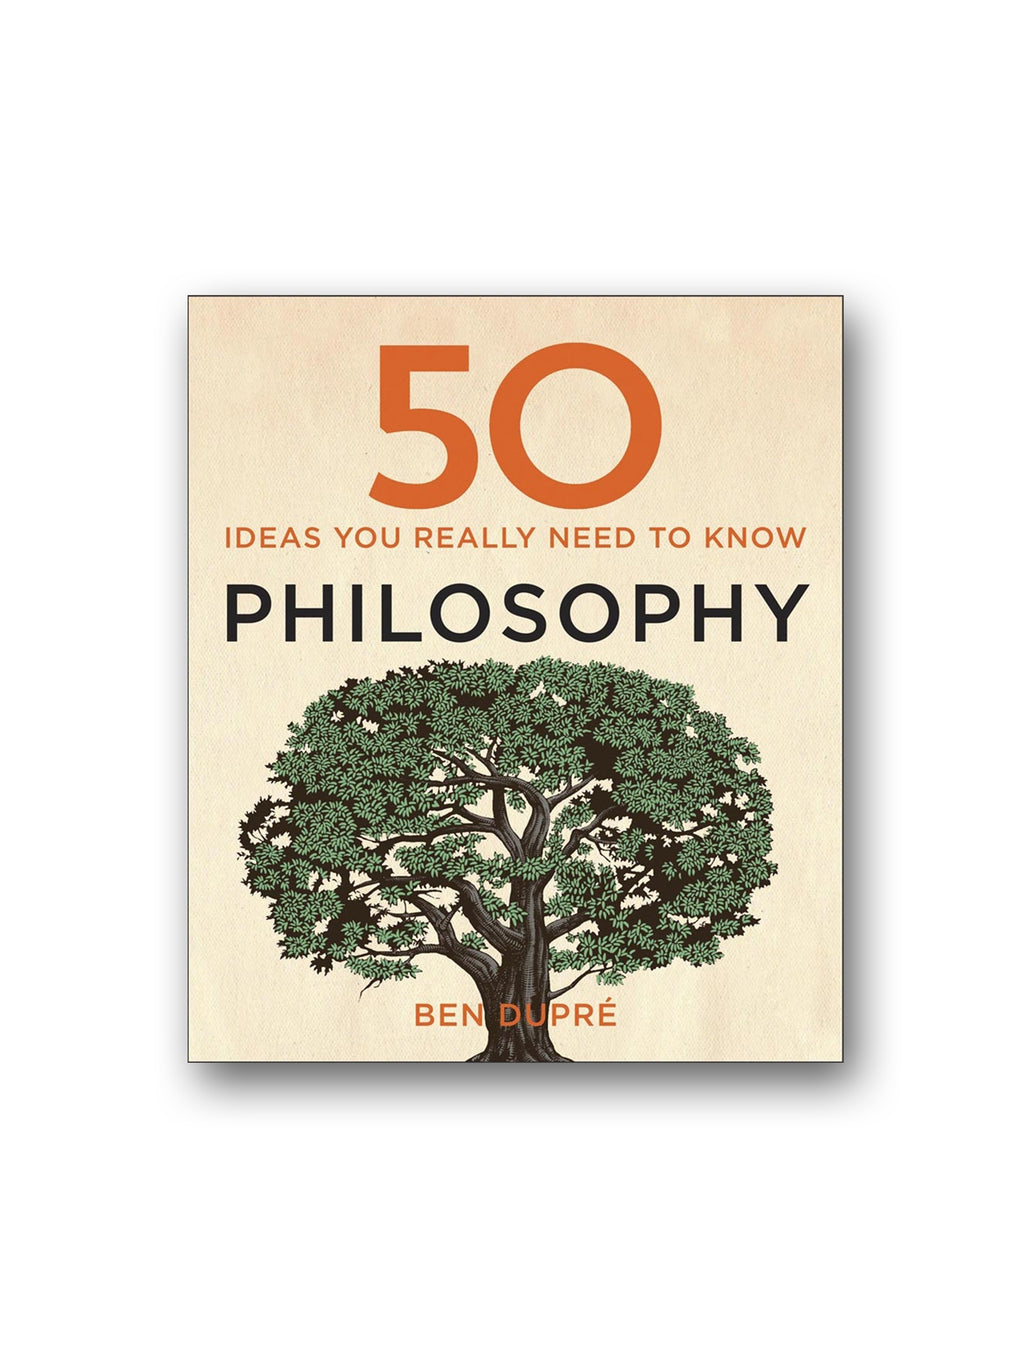 50 Philosophy Ideas You Really Need to Know